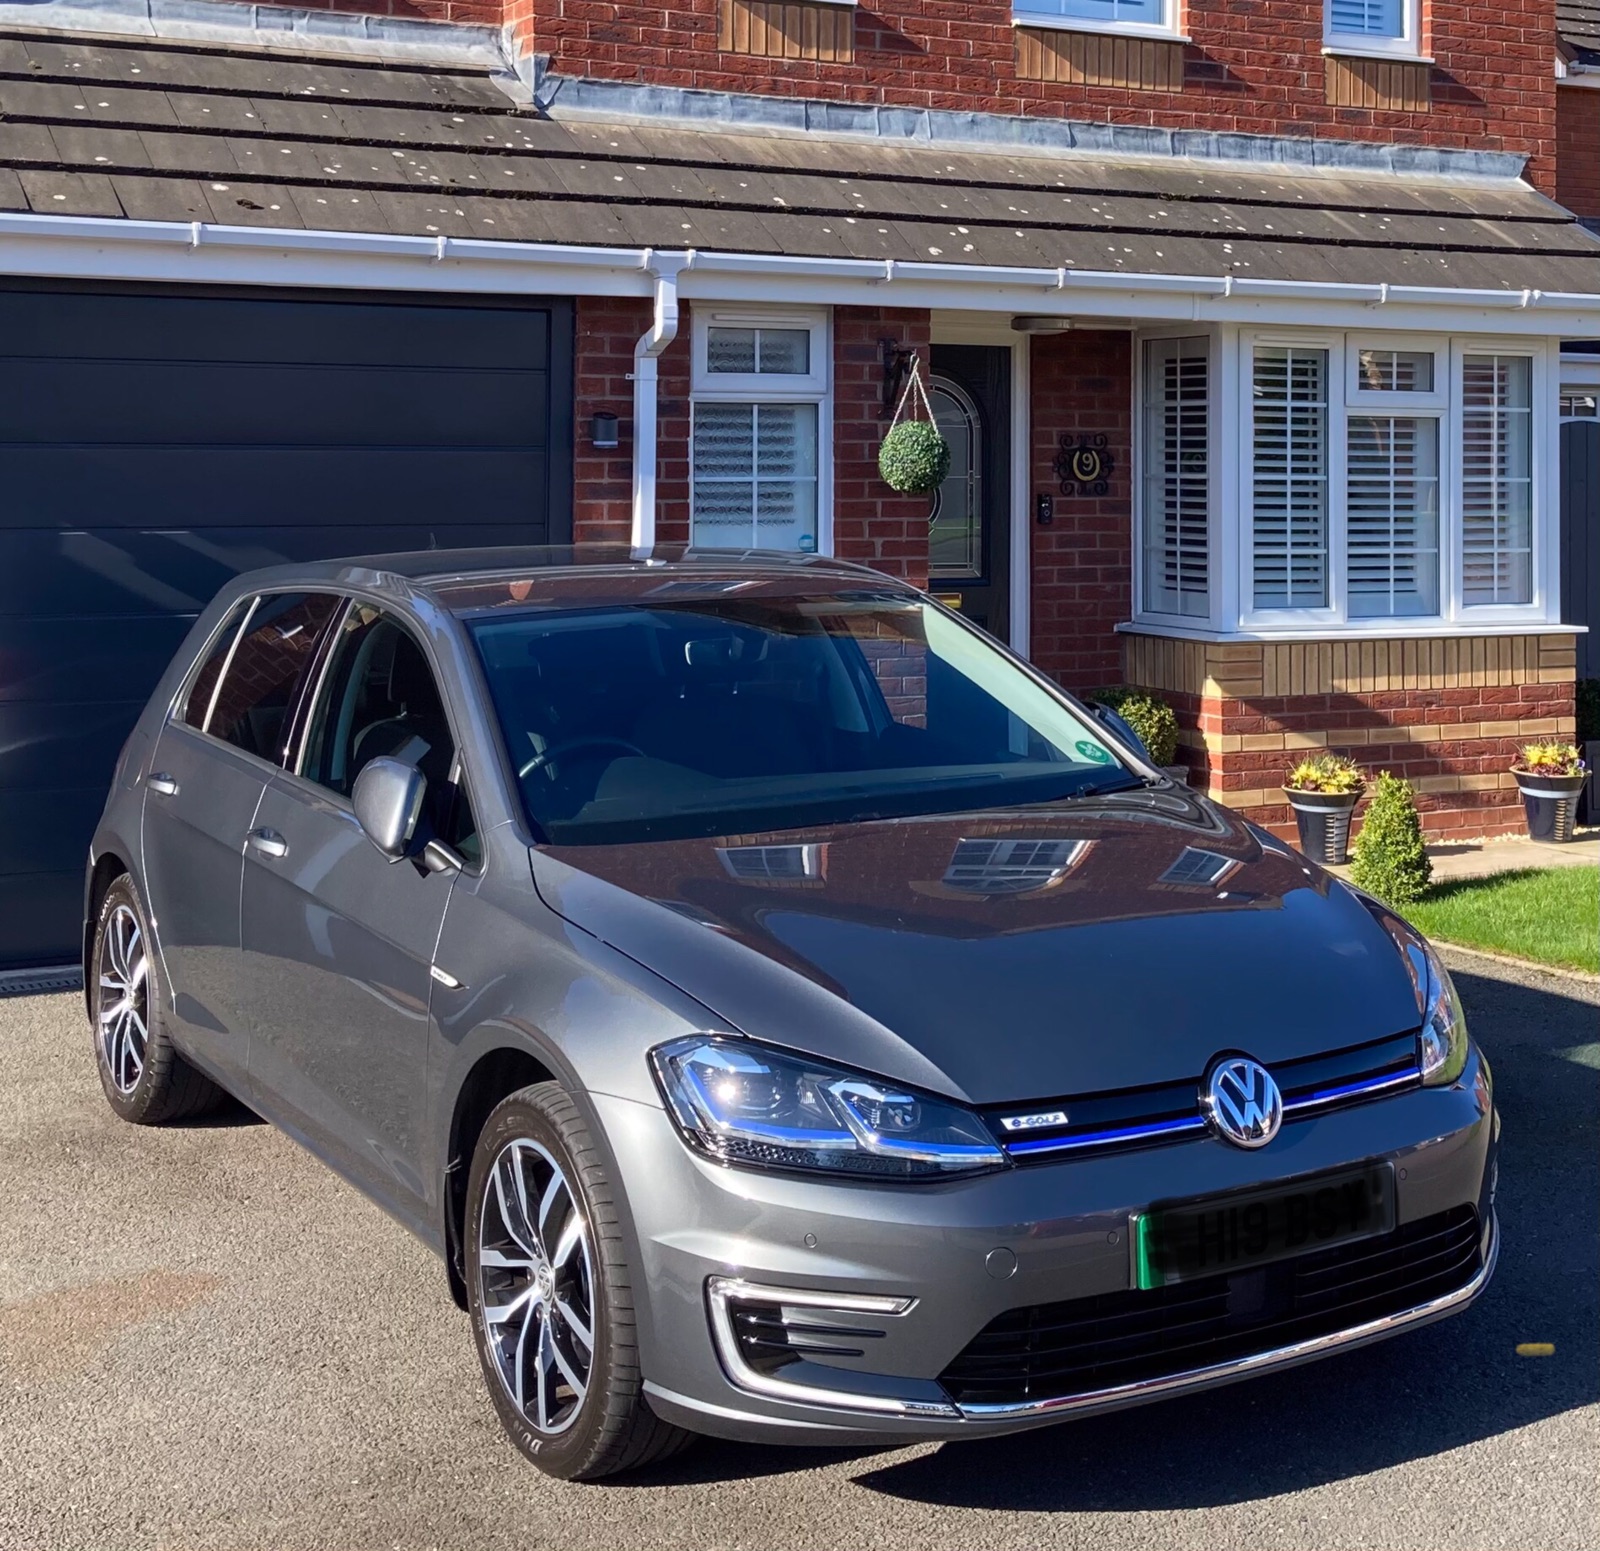 Volkswagen e-Golf Owner Review - It's a Golf, just electrified ⚡️ |  myEVreview